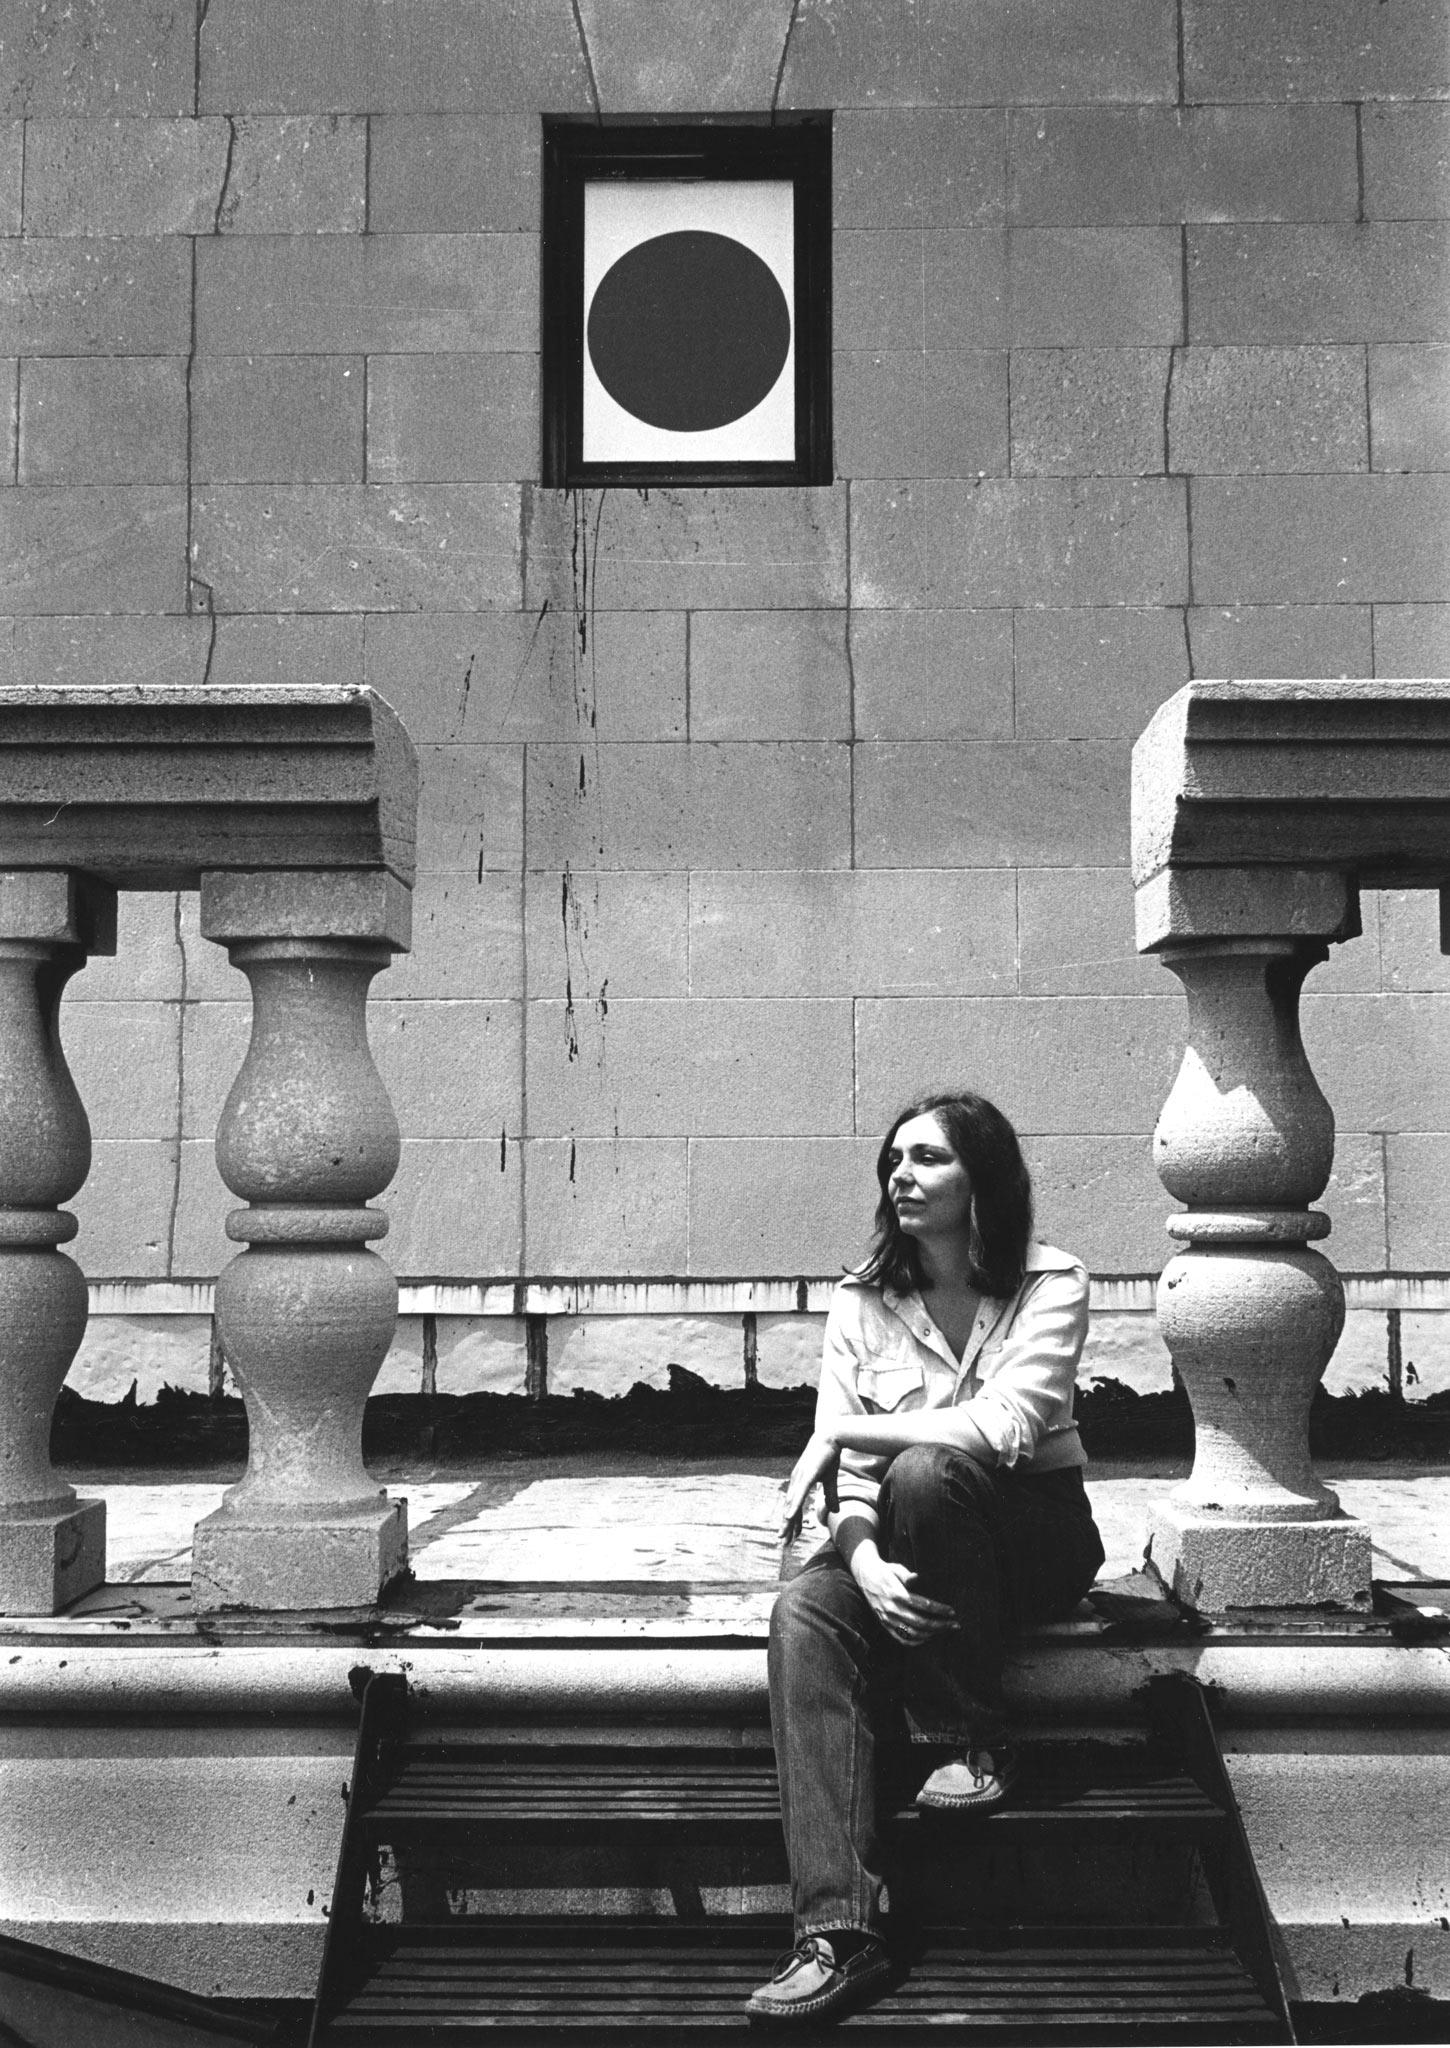 a person sits on stone steps with a large railing and a circular window inside a rectangular opening is behind them.